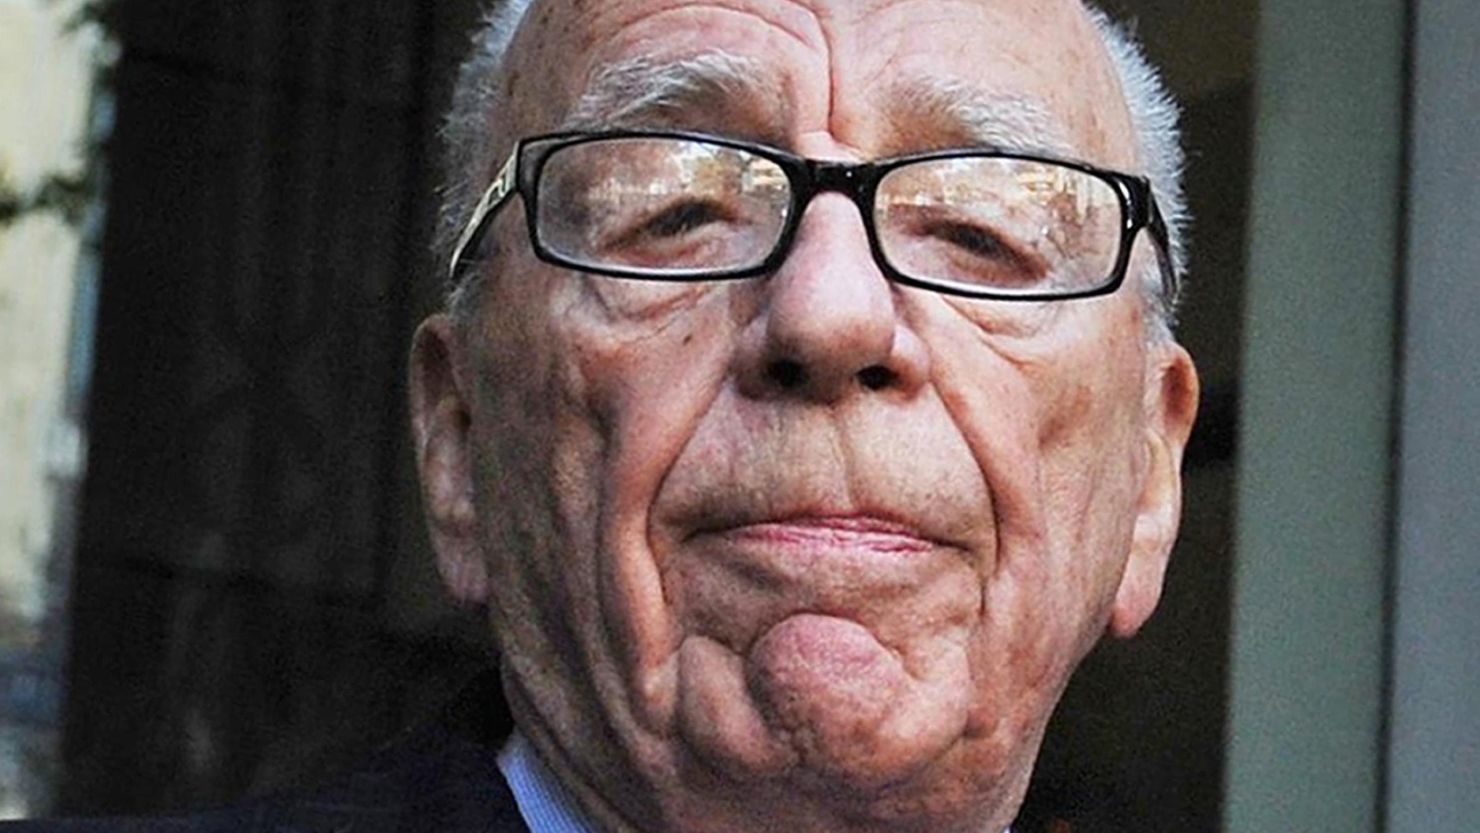 News Corp. Chairman Rupert Murdoch apologized to Parliament for calling police "incompetent."